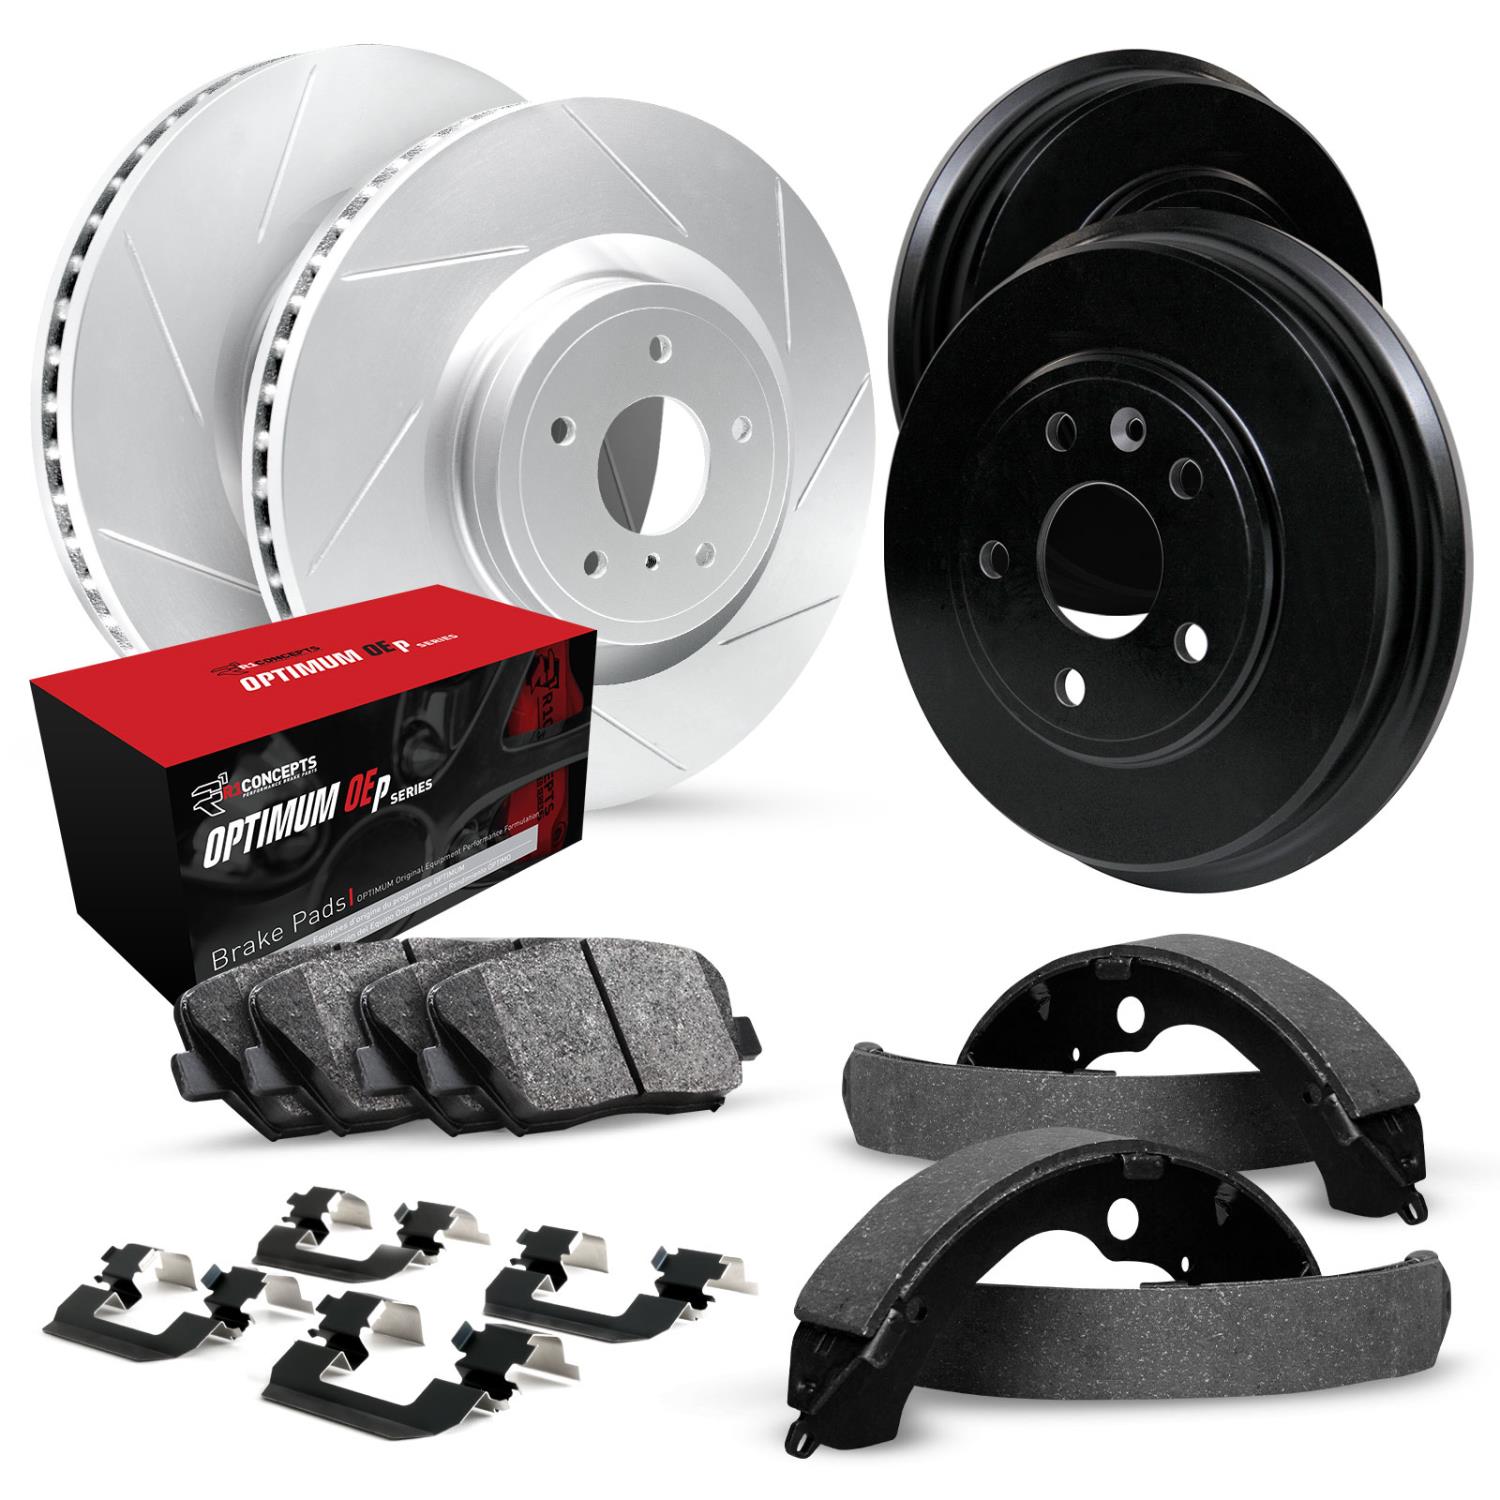 GEO-Carbon Slotted Brake Rotor & Drum Set w/Optimum OE Pads, Shoes, & Hardware, 1975-1976 Ford/Lincoln/Mercury/Mazda